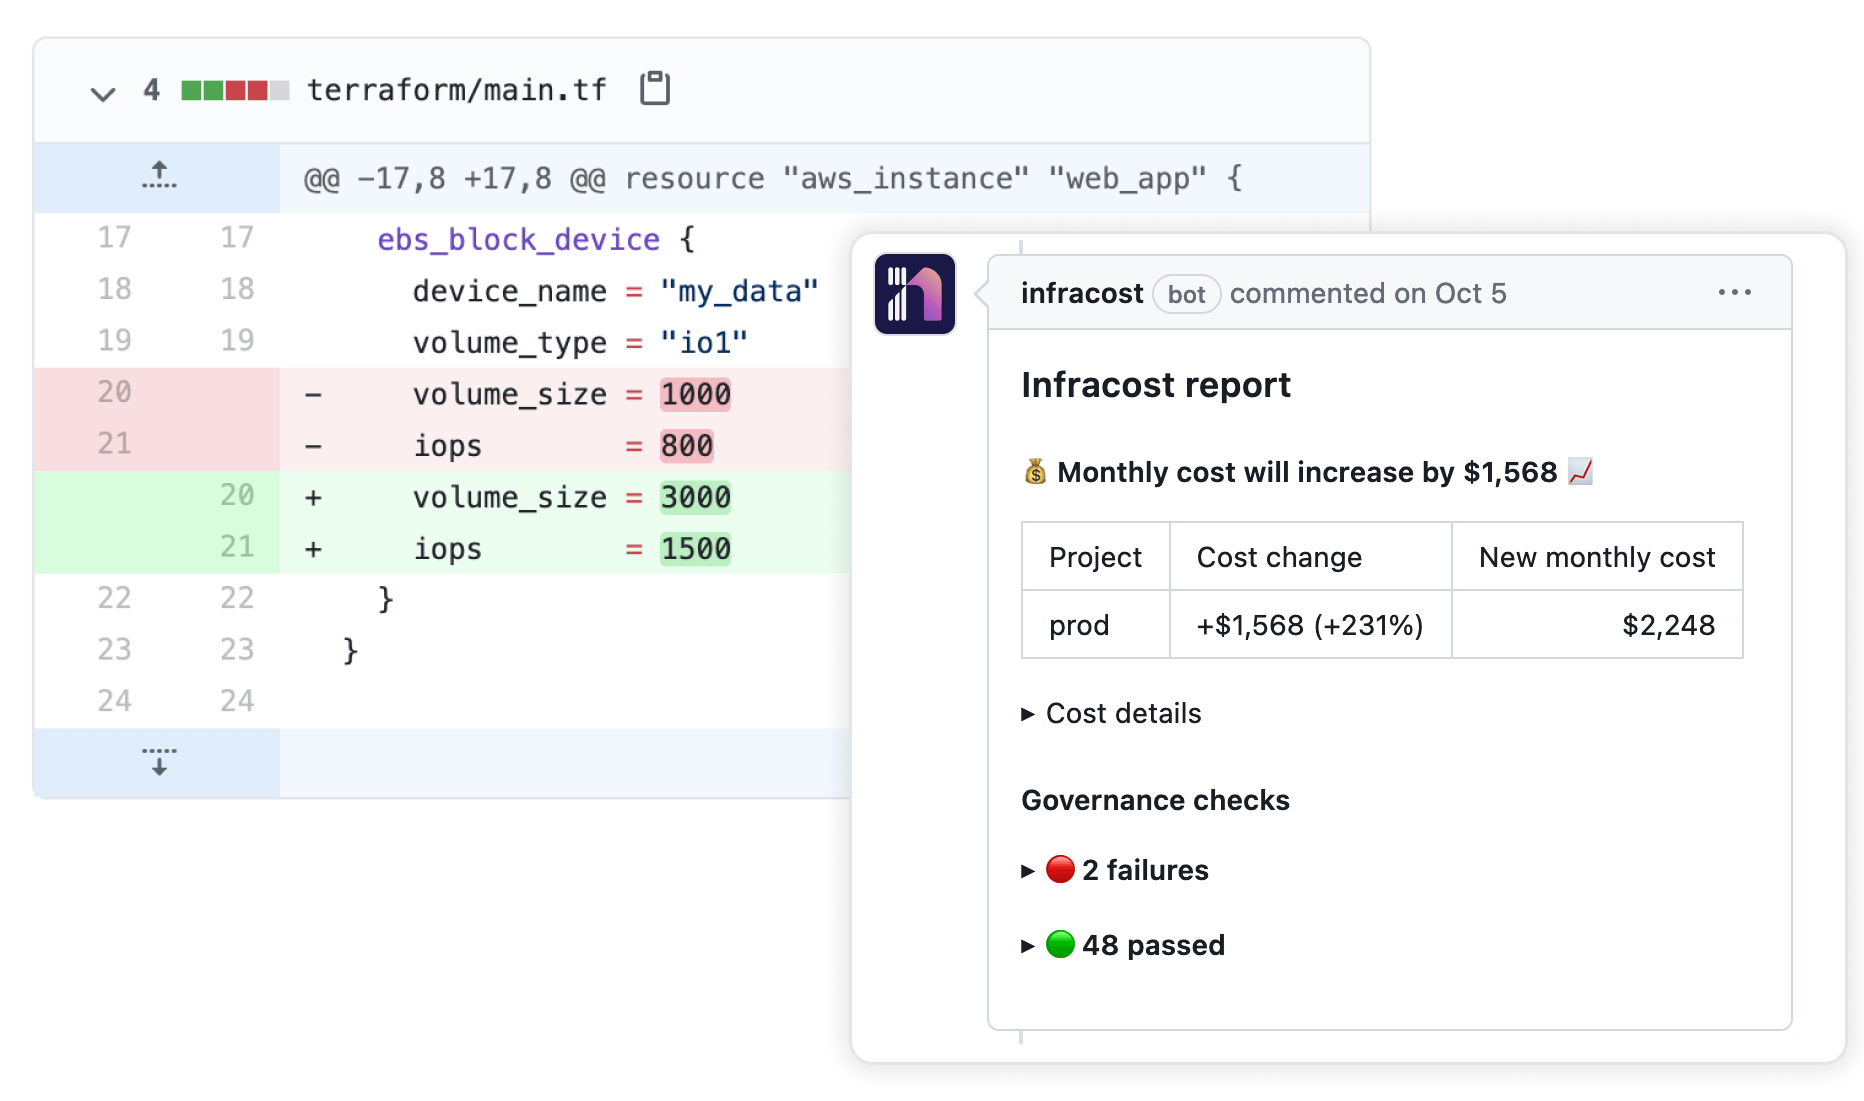 Infracost pull request comment